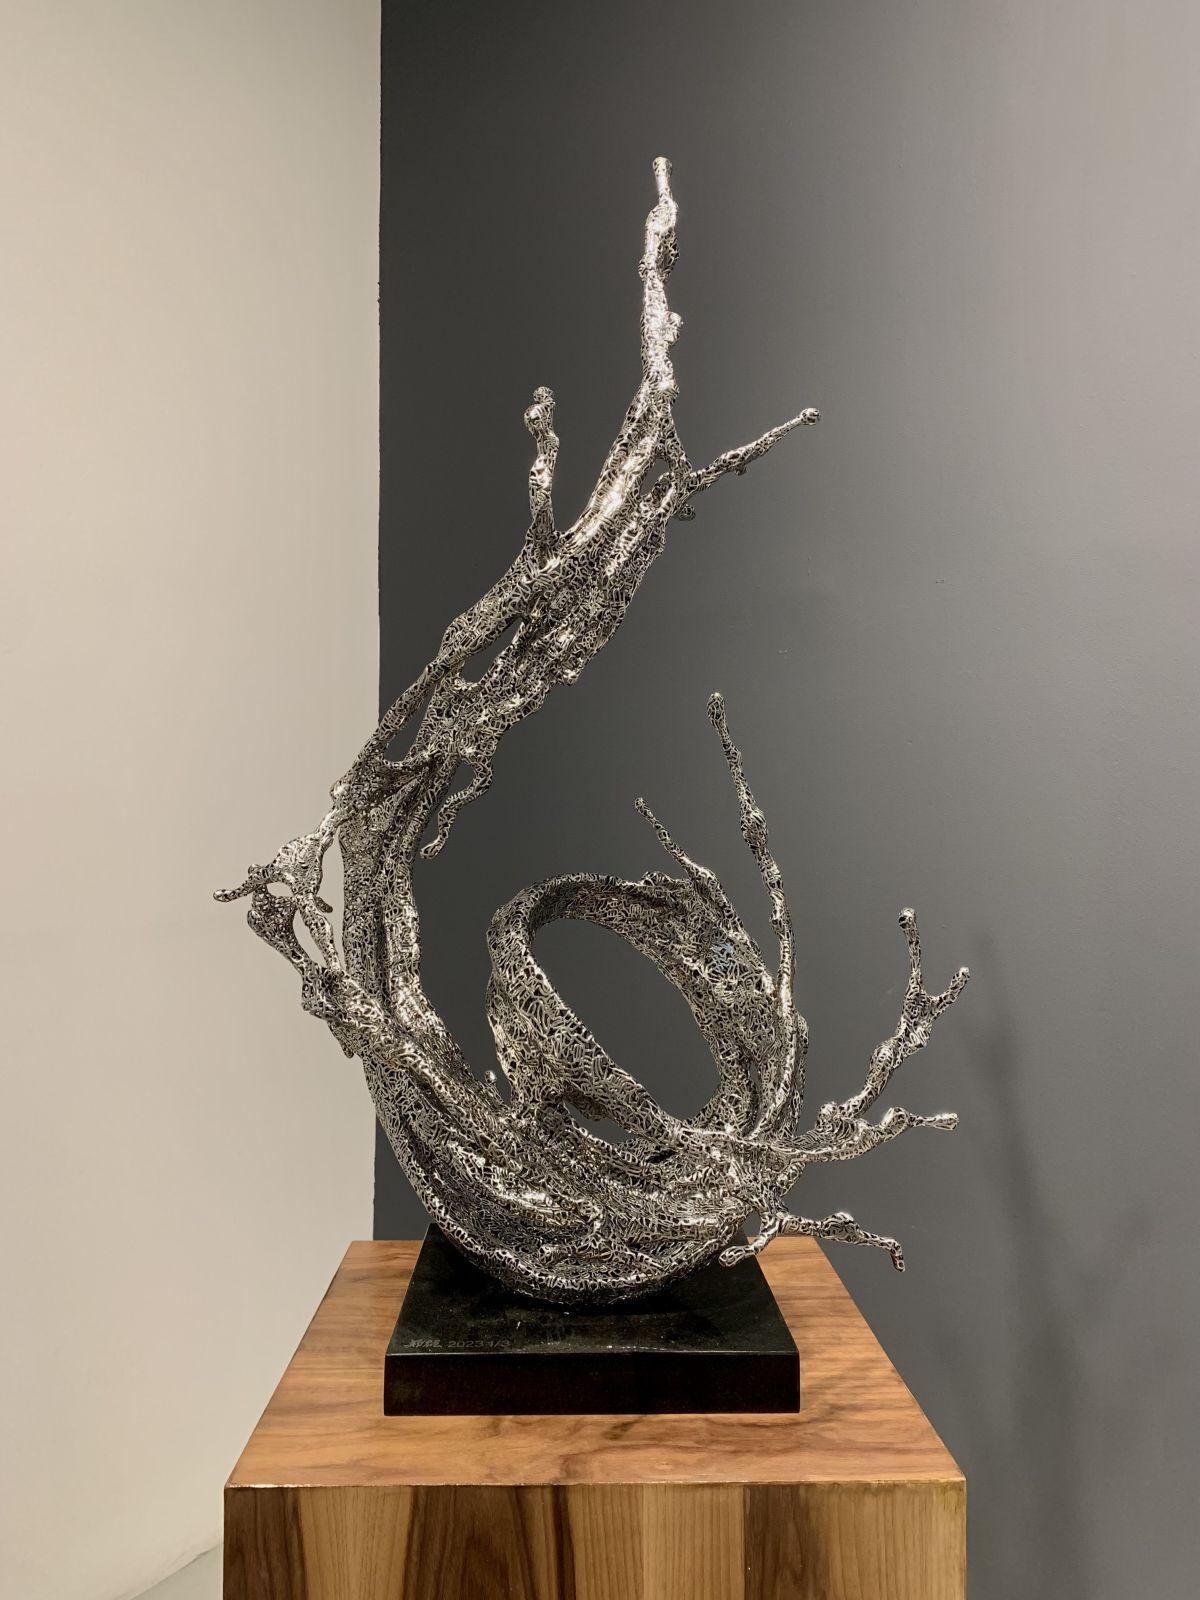 Contemporary Chinese calligraphic stainless steel sculpture - Sculpture by Zheng Lu